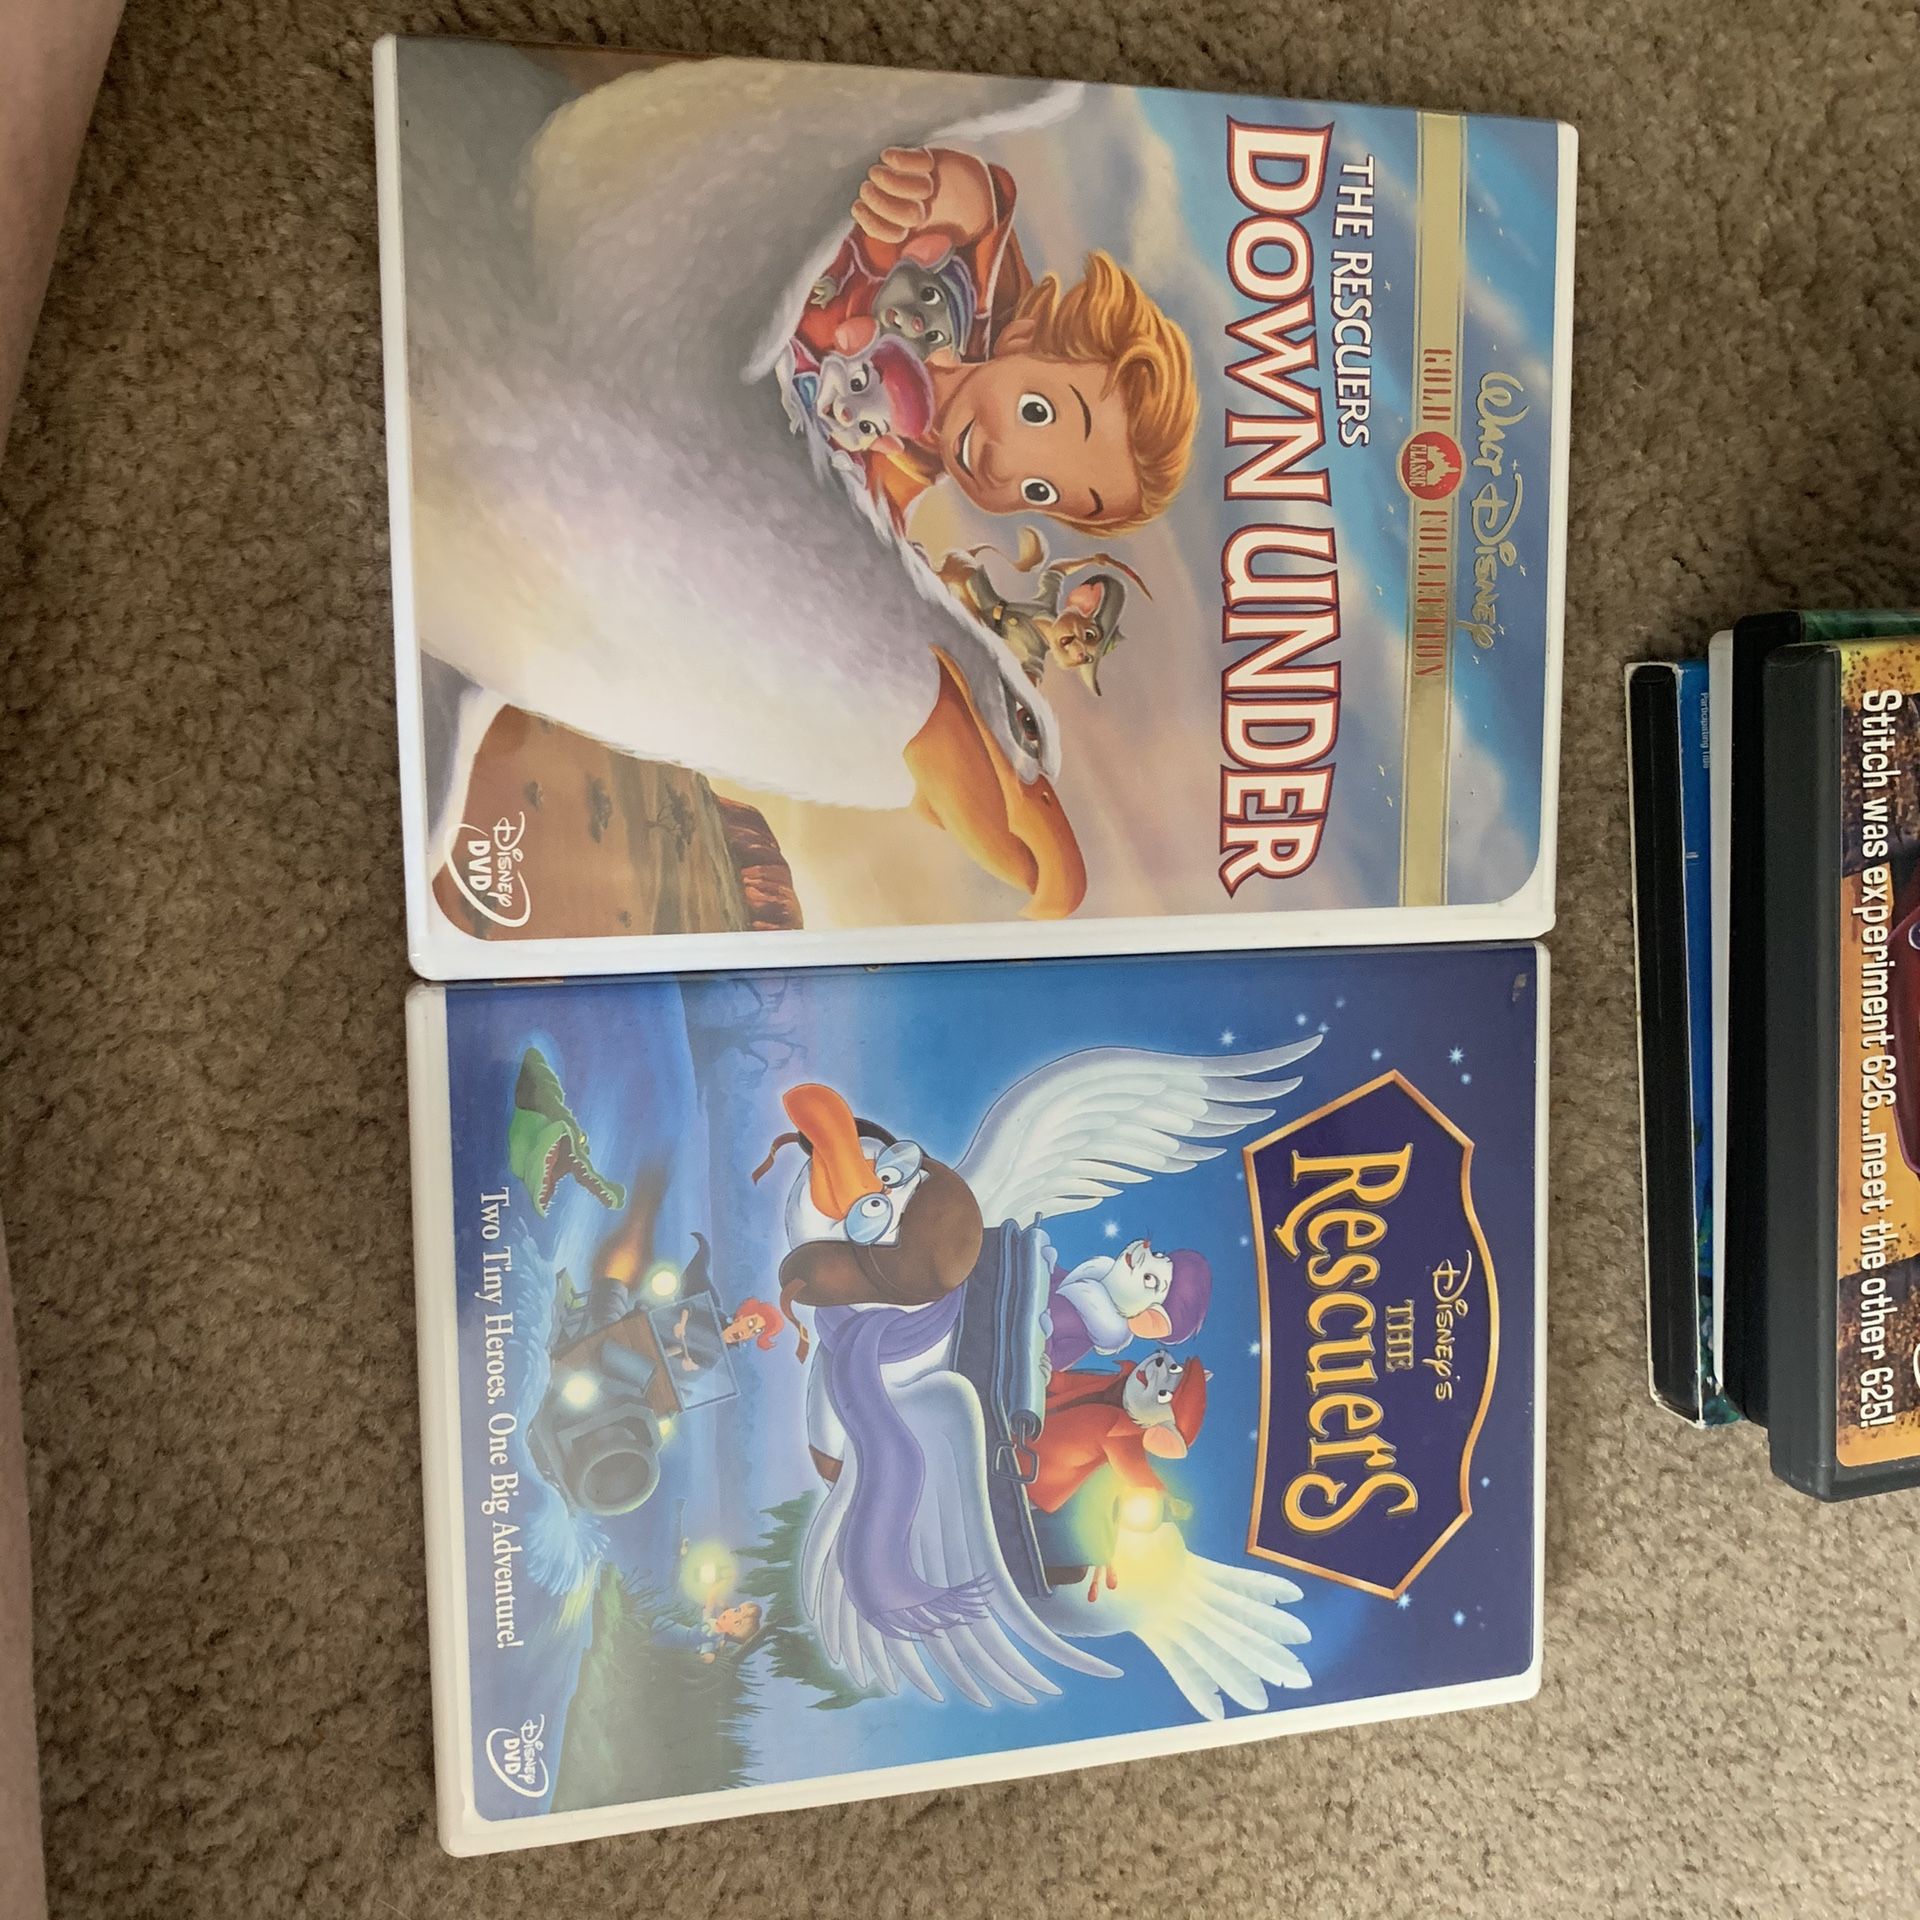 $3 Blu-ray Disney collection like new excellent condition got lots more movies not shown between $5 some rare finds collected